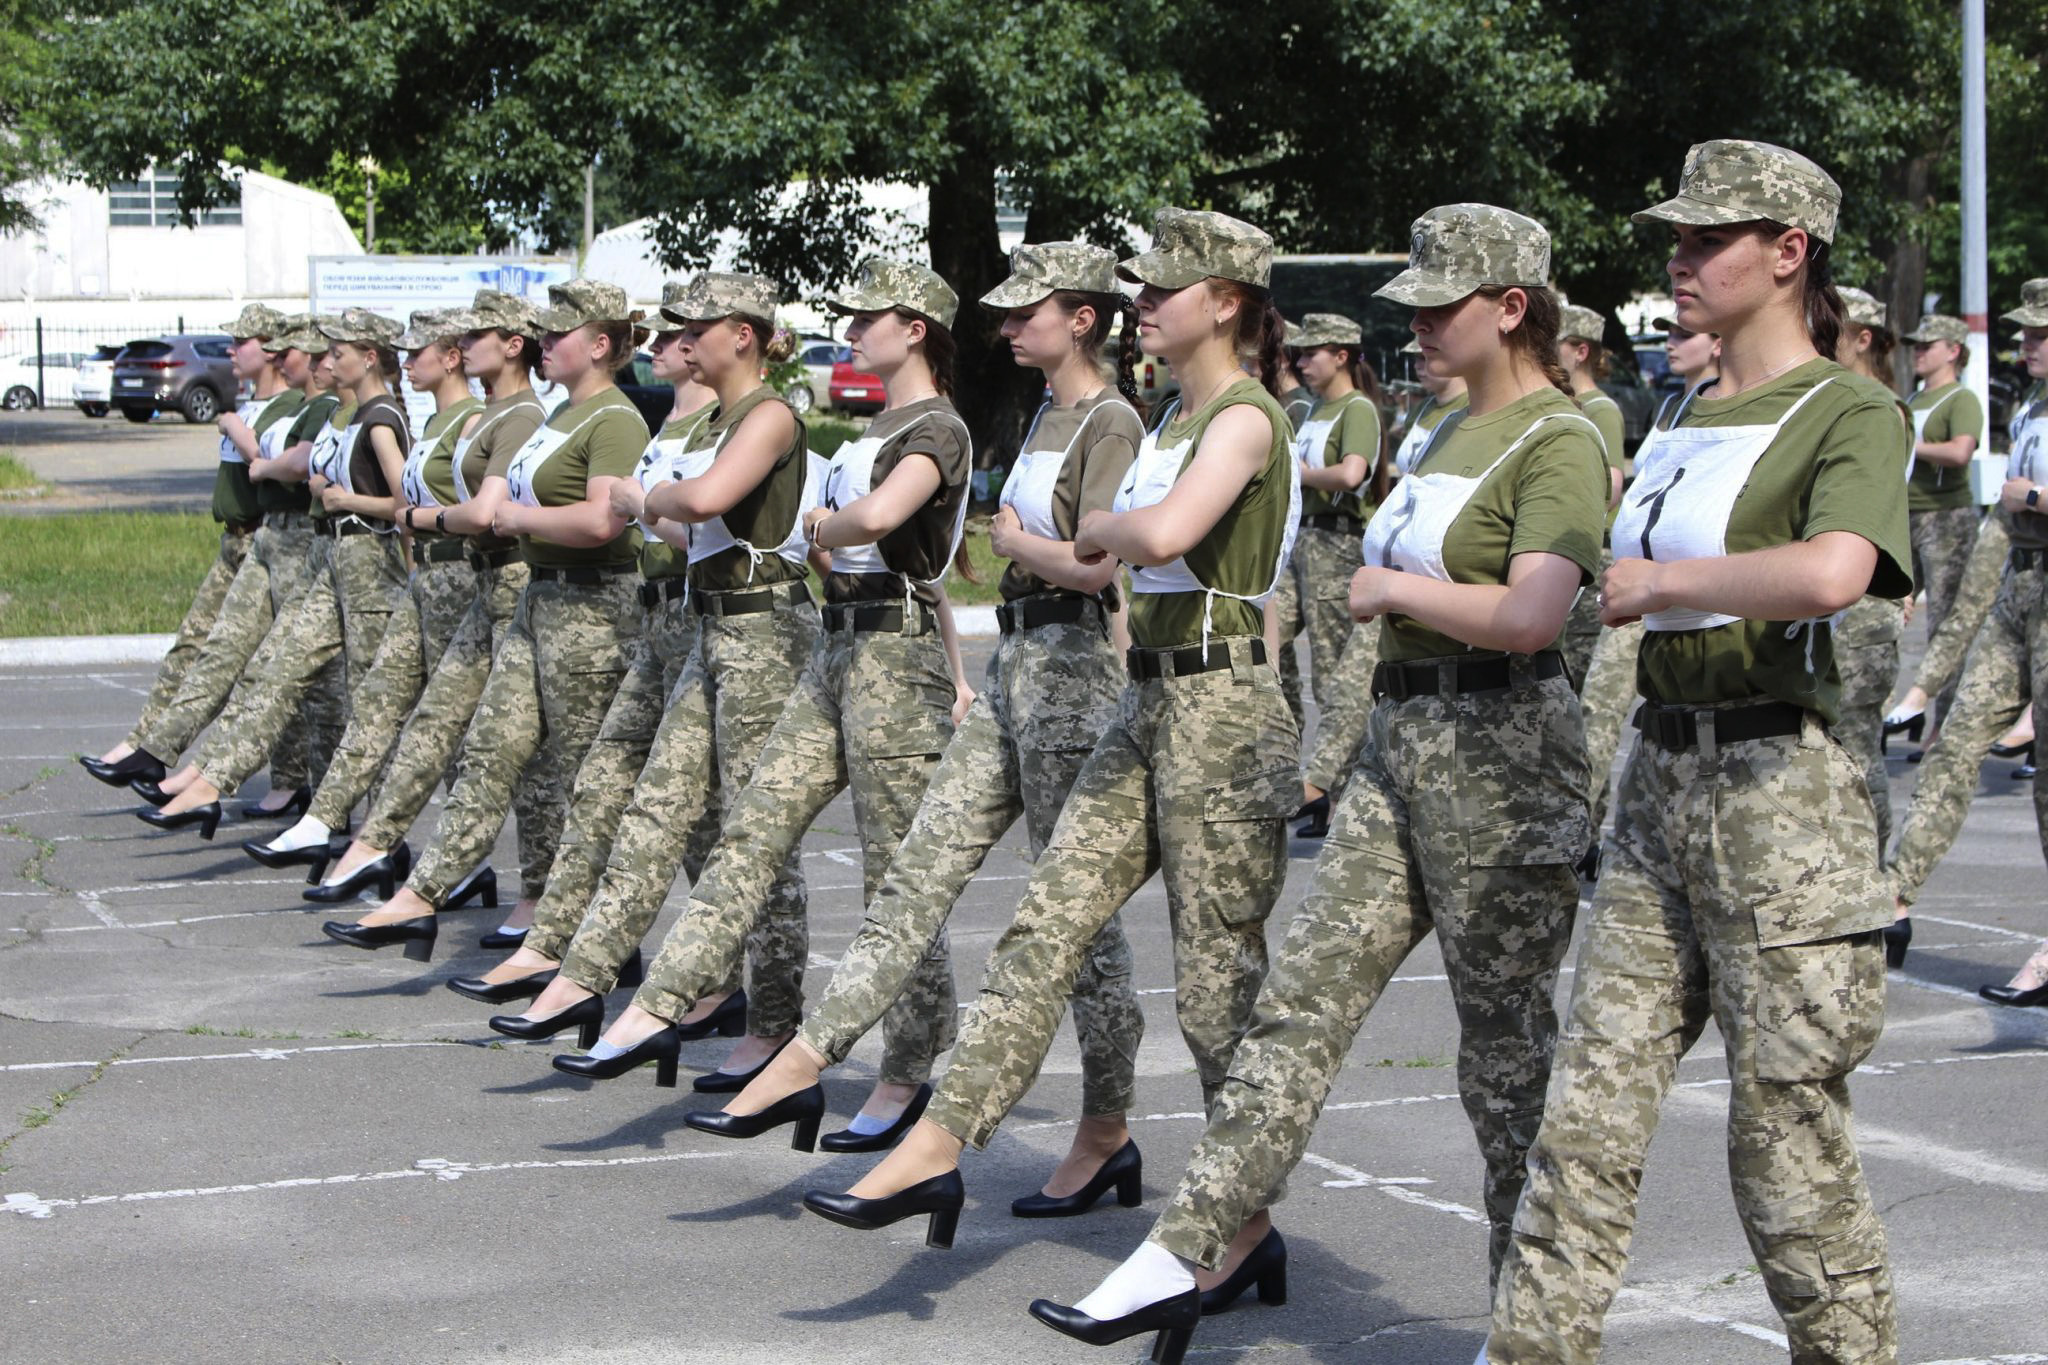 In this photo taken and released by the Ukrainian Defense ministry press-service on July 2, 2021, Ukrainian female soldiers wear heels while taking part in the the military parade rehearsal in Kyiv, Ukraine. Ukraine's defense minister is under pressure from members of the government over the decision to have female military cadets wear mid-heeled pumps in a parade. A joint statement from three Cabinet members, including Minister of Veterans Affairs Yulia Laputina, said “the purpose of any military parade is to demonstrate the military ability of the army. (Ukrainian Defense Ministry Press Office via AP)